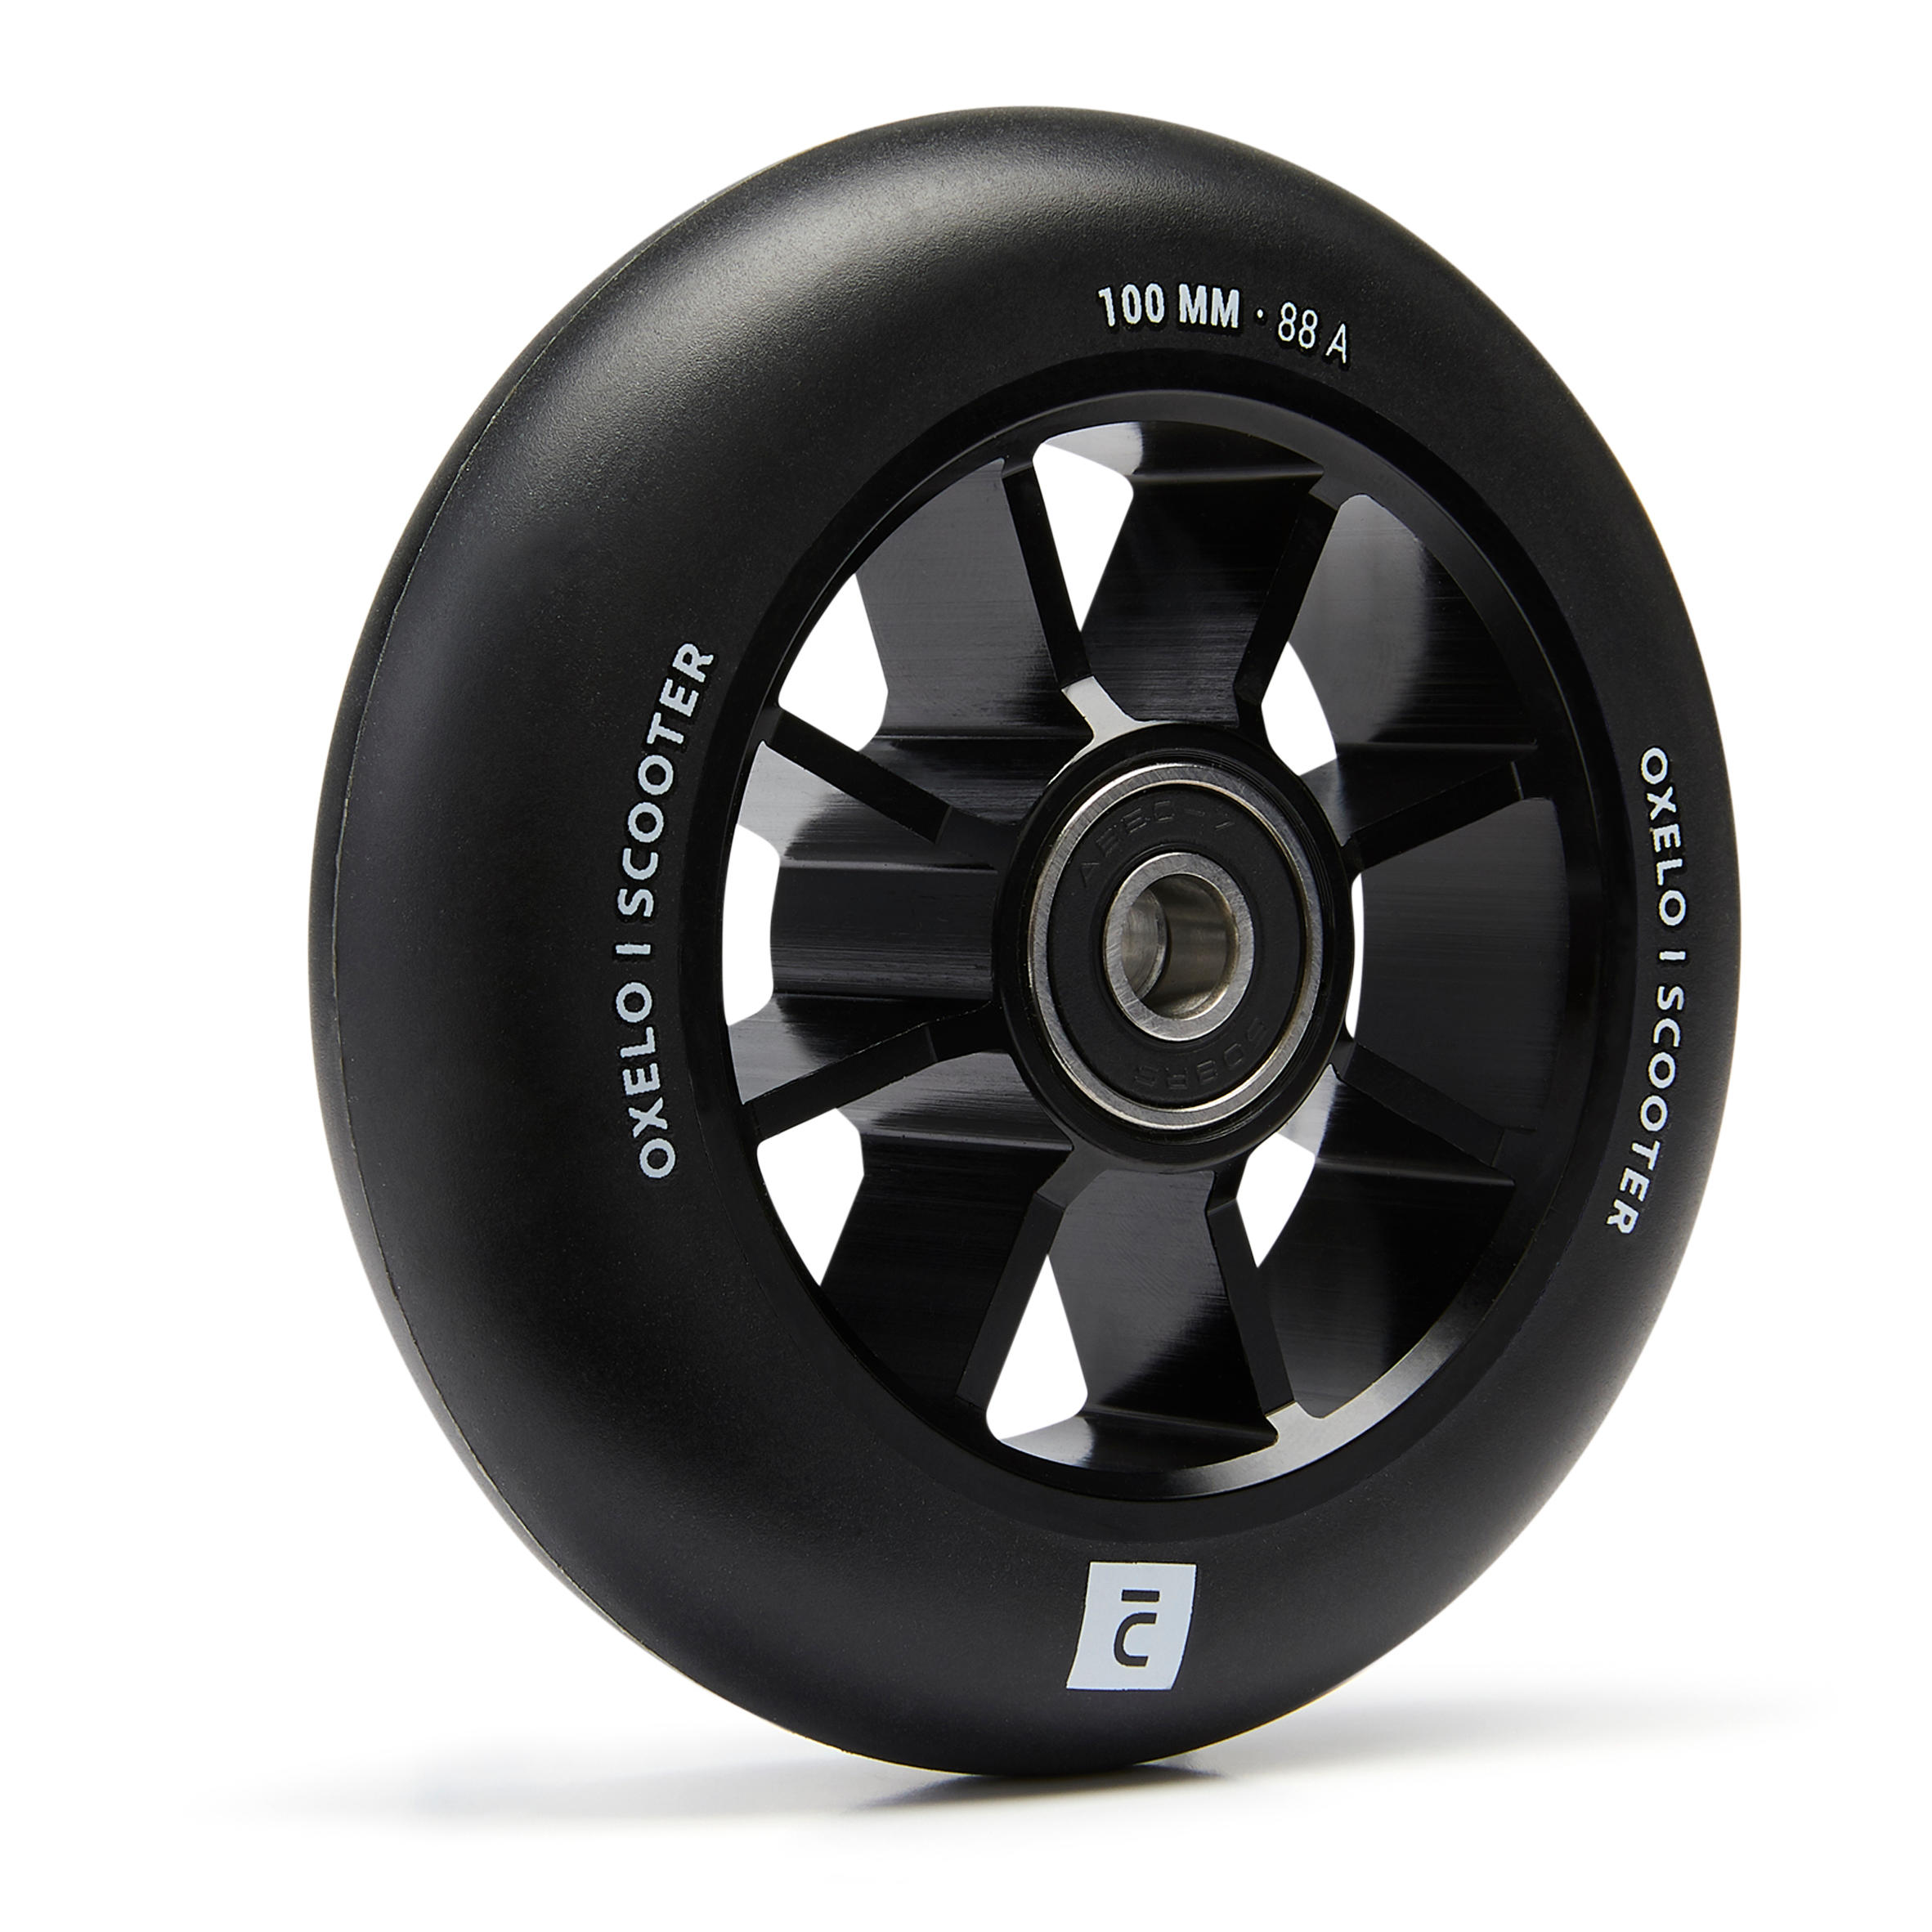 Roue freestyle 100 mm - PU85A - OXELO